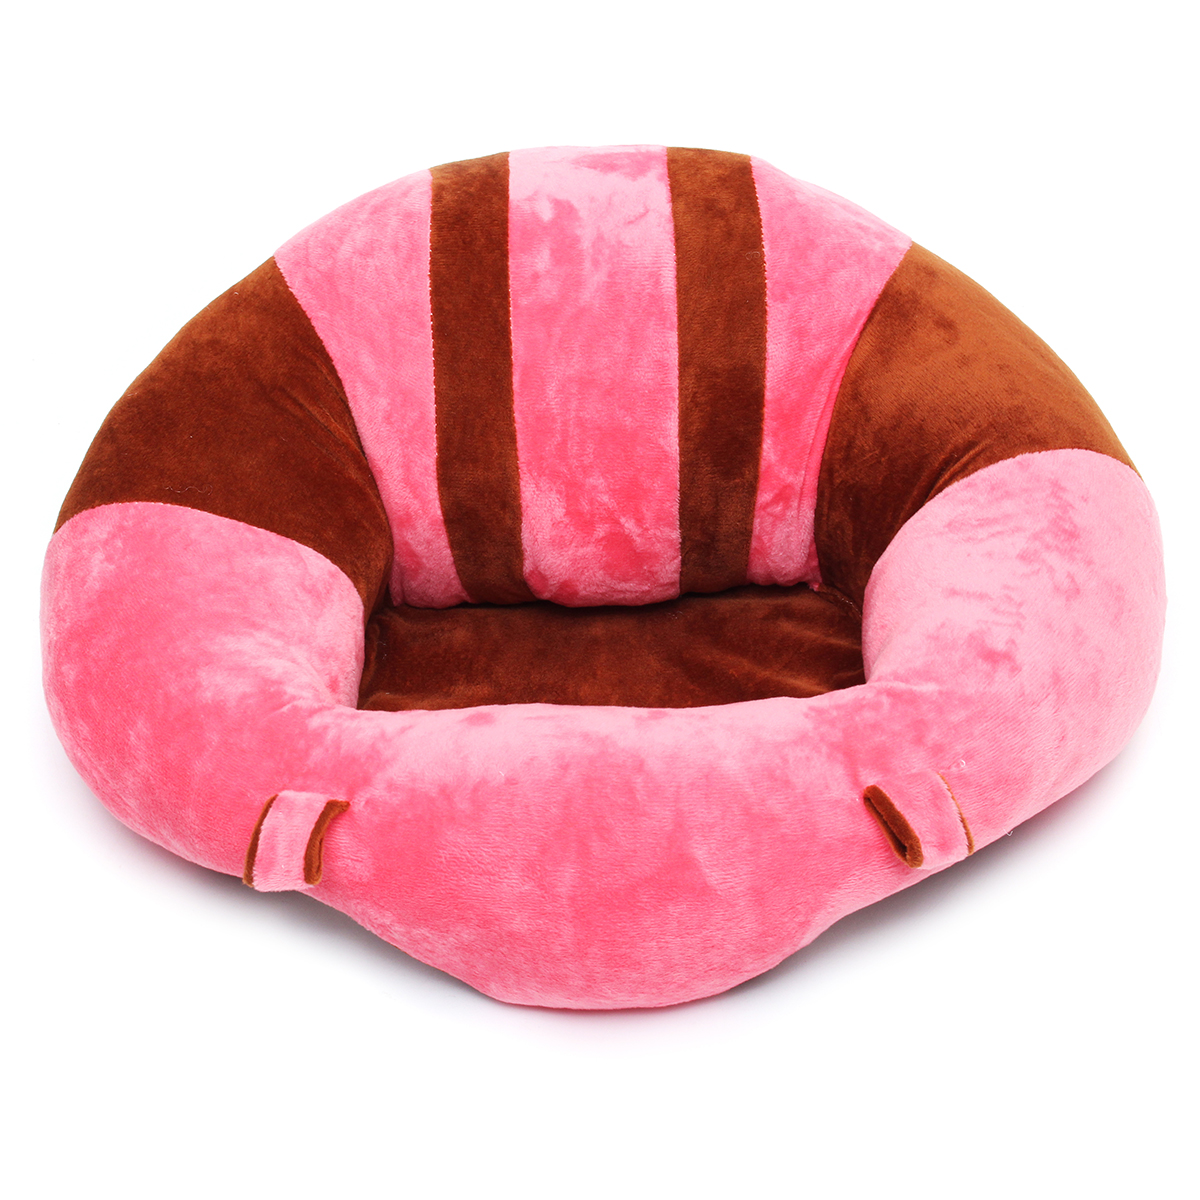 Baby-Sofa-Support-Seat-Nursing-Pillow-Safety-Feeding-Cushion-Pad-Chair-Plush-Toy-1297318